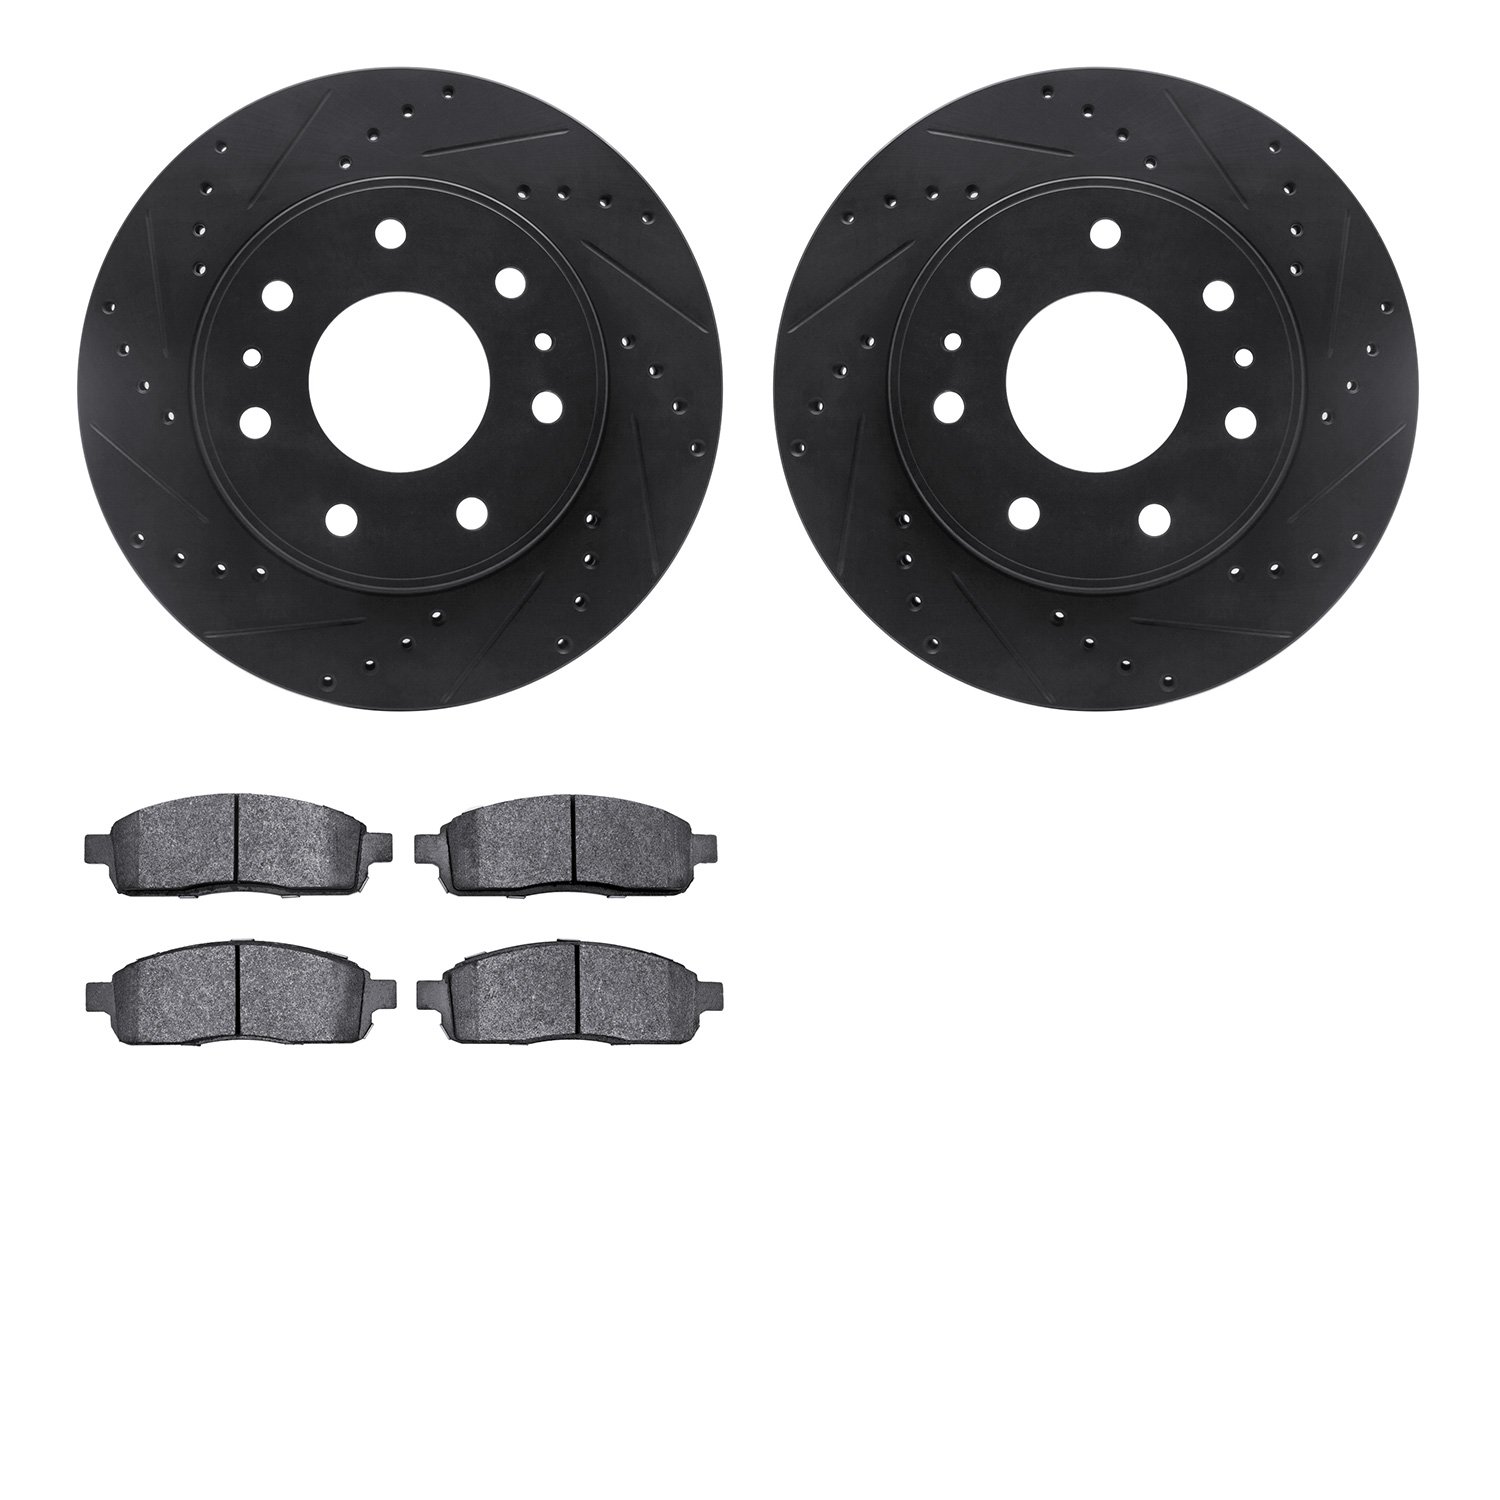 8402-54094 Drilled/Slotted Brake Rotors with Ultimate-Duty Brake Pads Kit [Black], 2009-2009 Ford/Lincoln/Mercury/Mazda, Positio